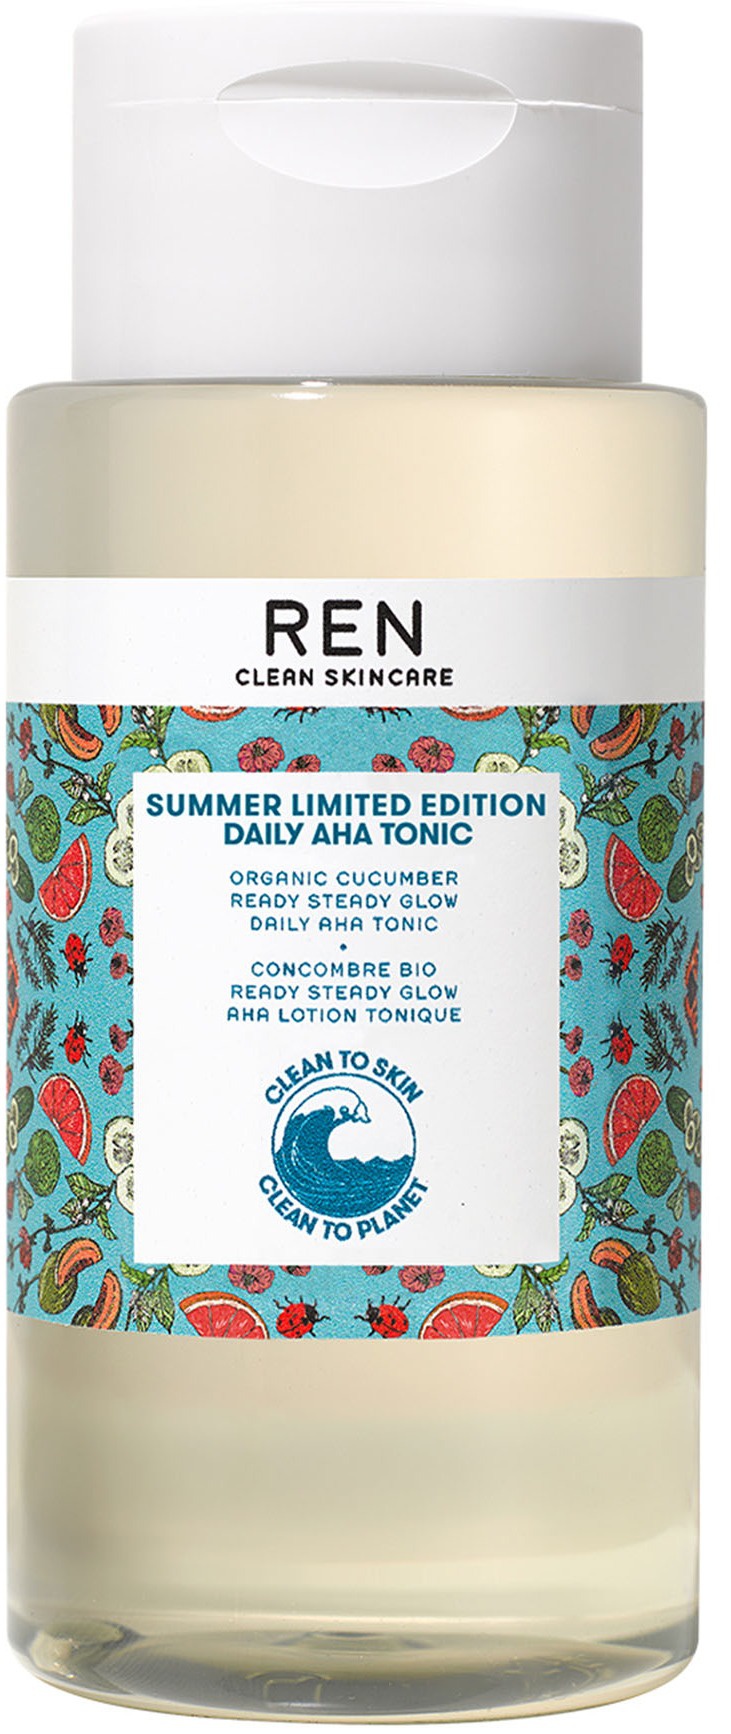 REN Summer Limited Edition Daily AHA Tonic